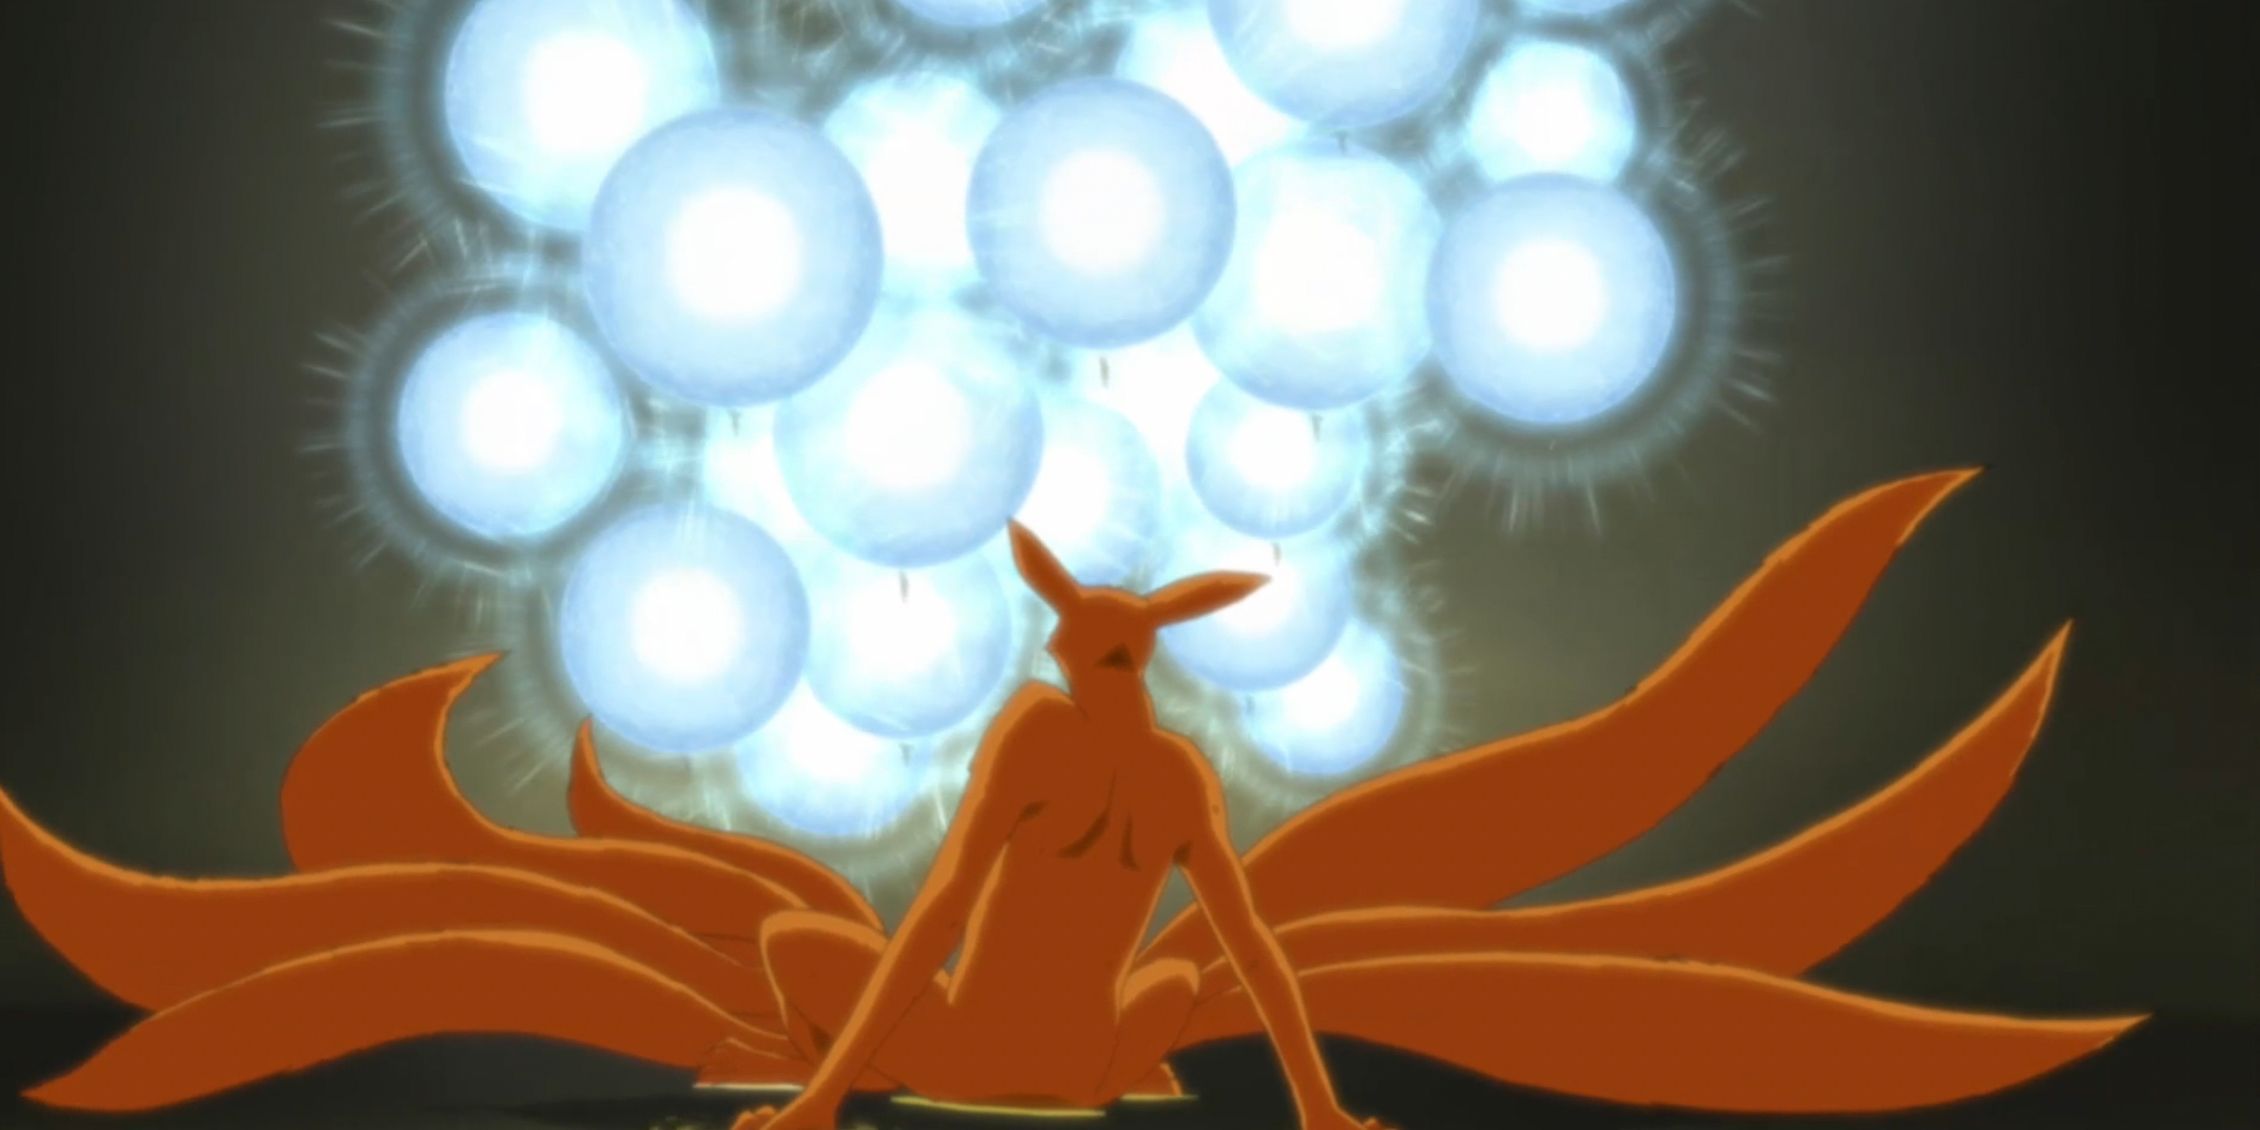 Kurama sits in front of several serial spheres in Naruto Shippuden